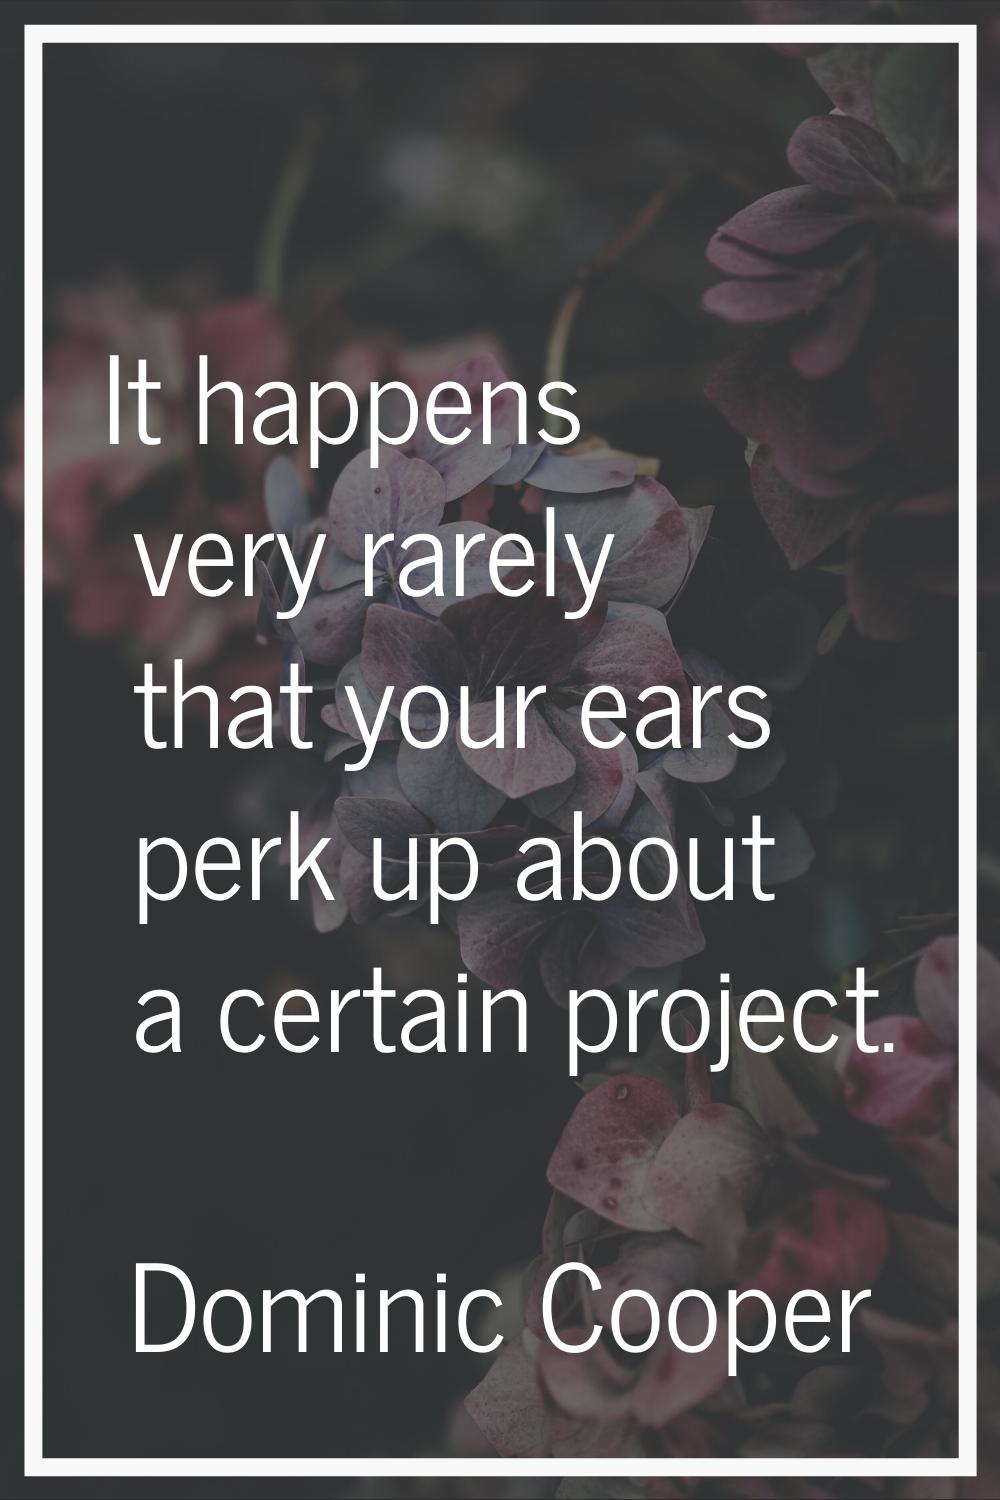 It happens very rarely that your ears perk up about a certain project.